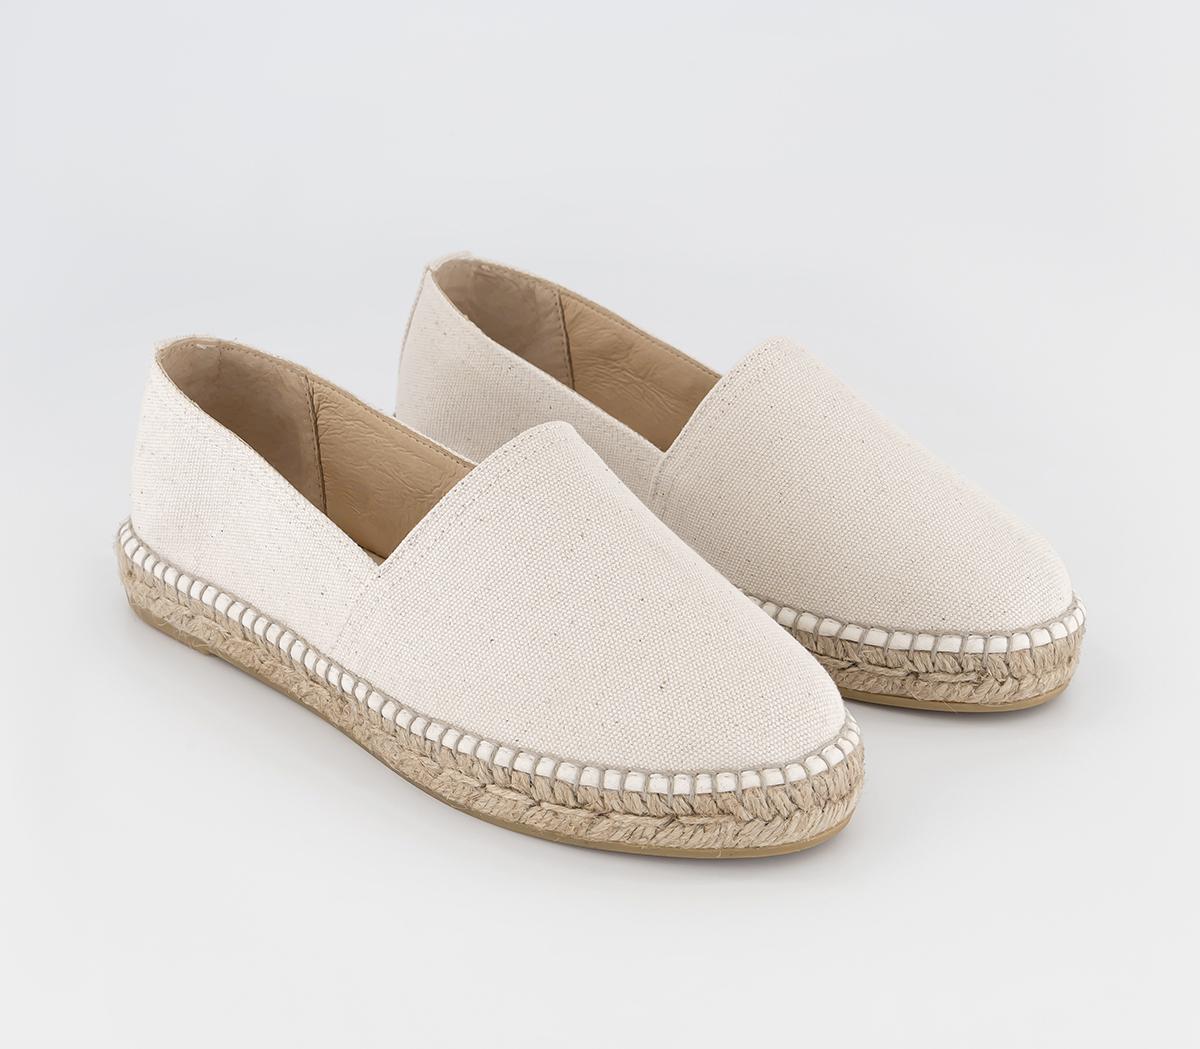 Gaimo for OFFICE Camping Slip On Espadrilles Cream Canvas - Flat Shoes ...